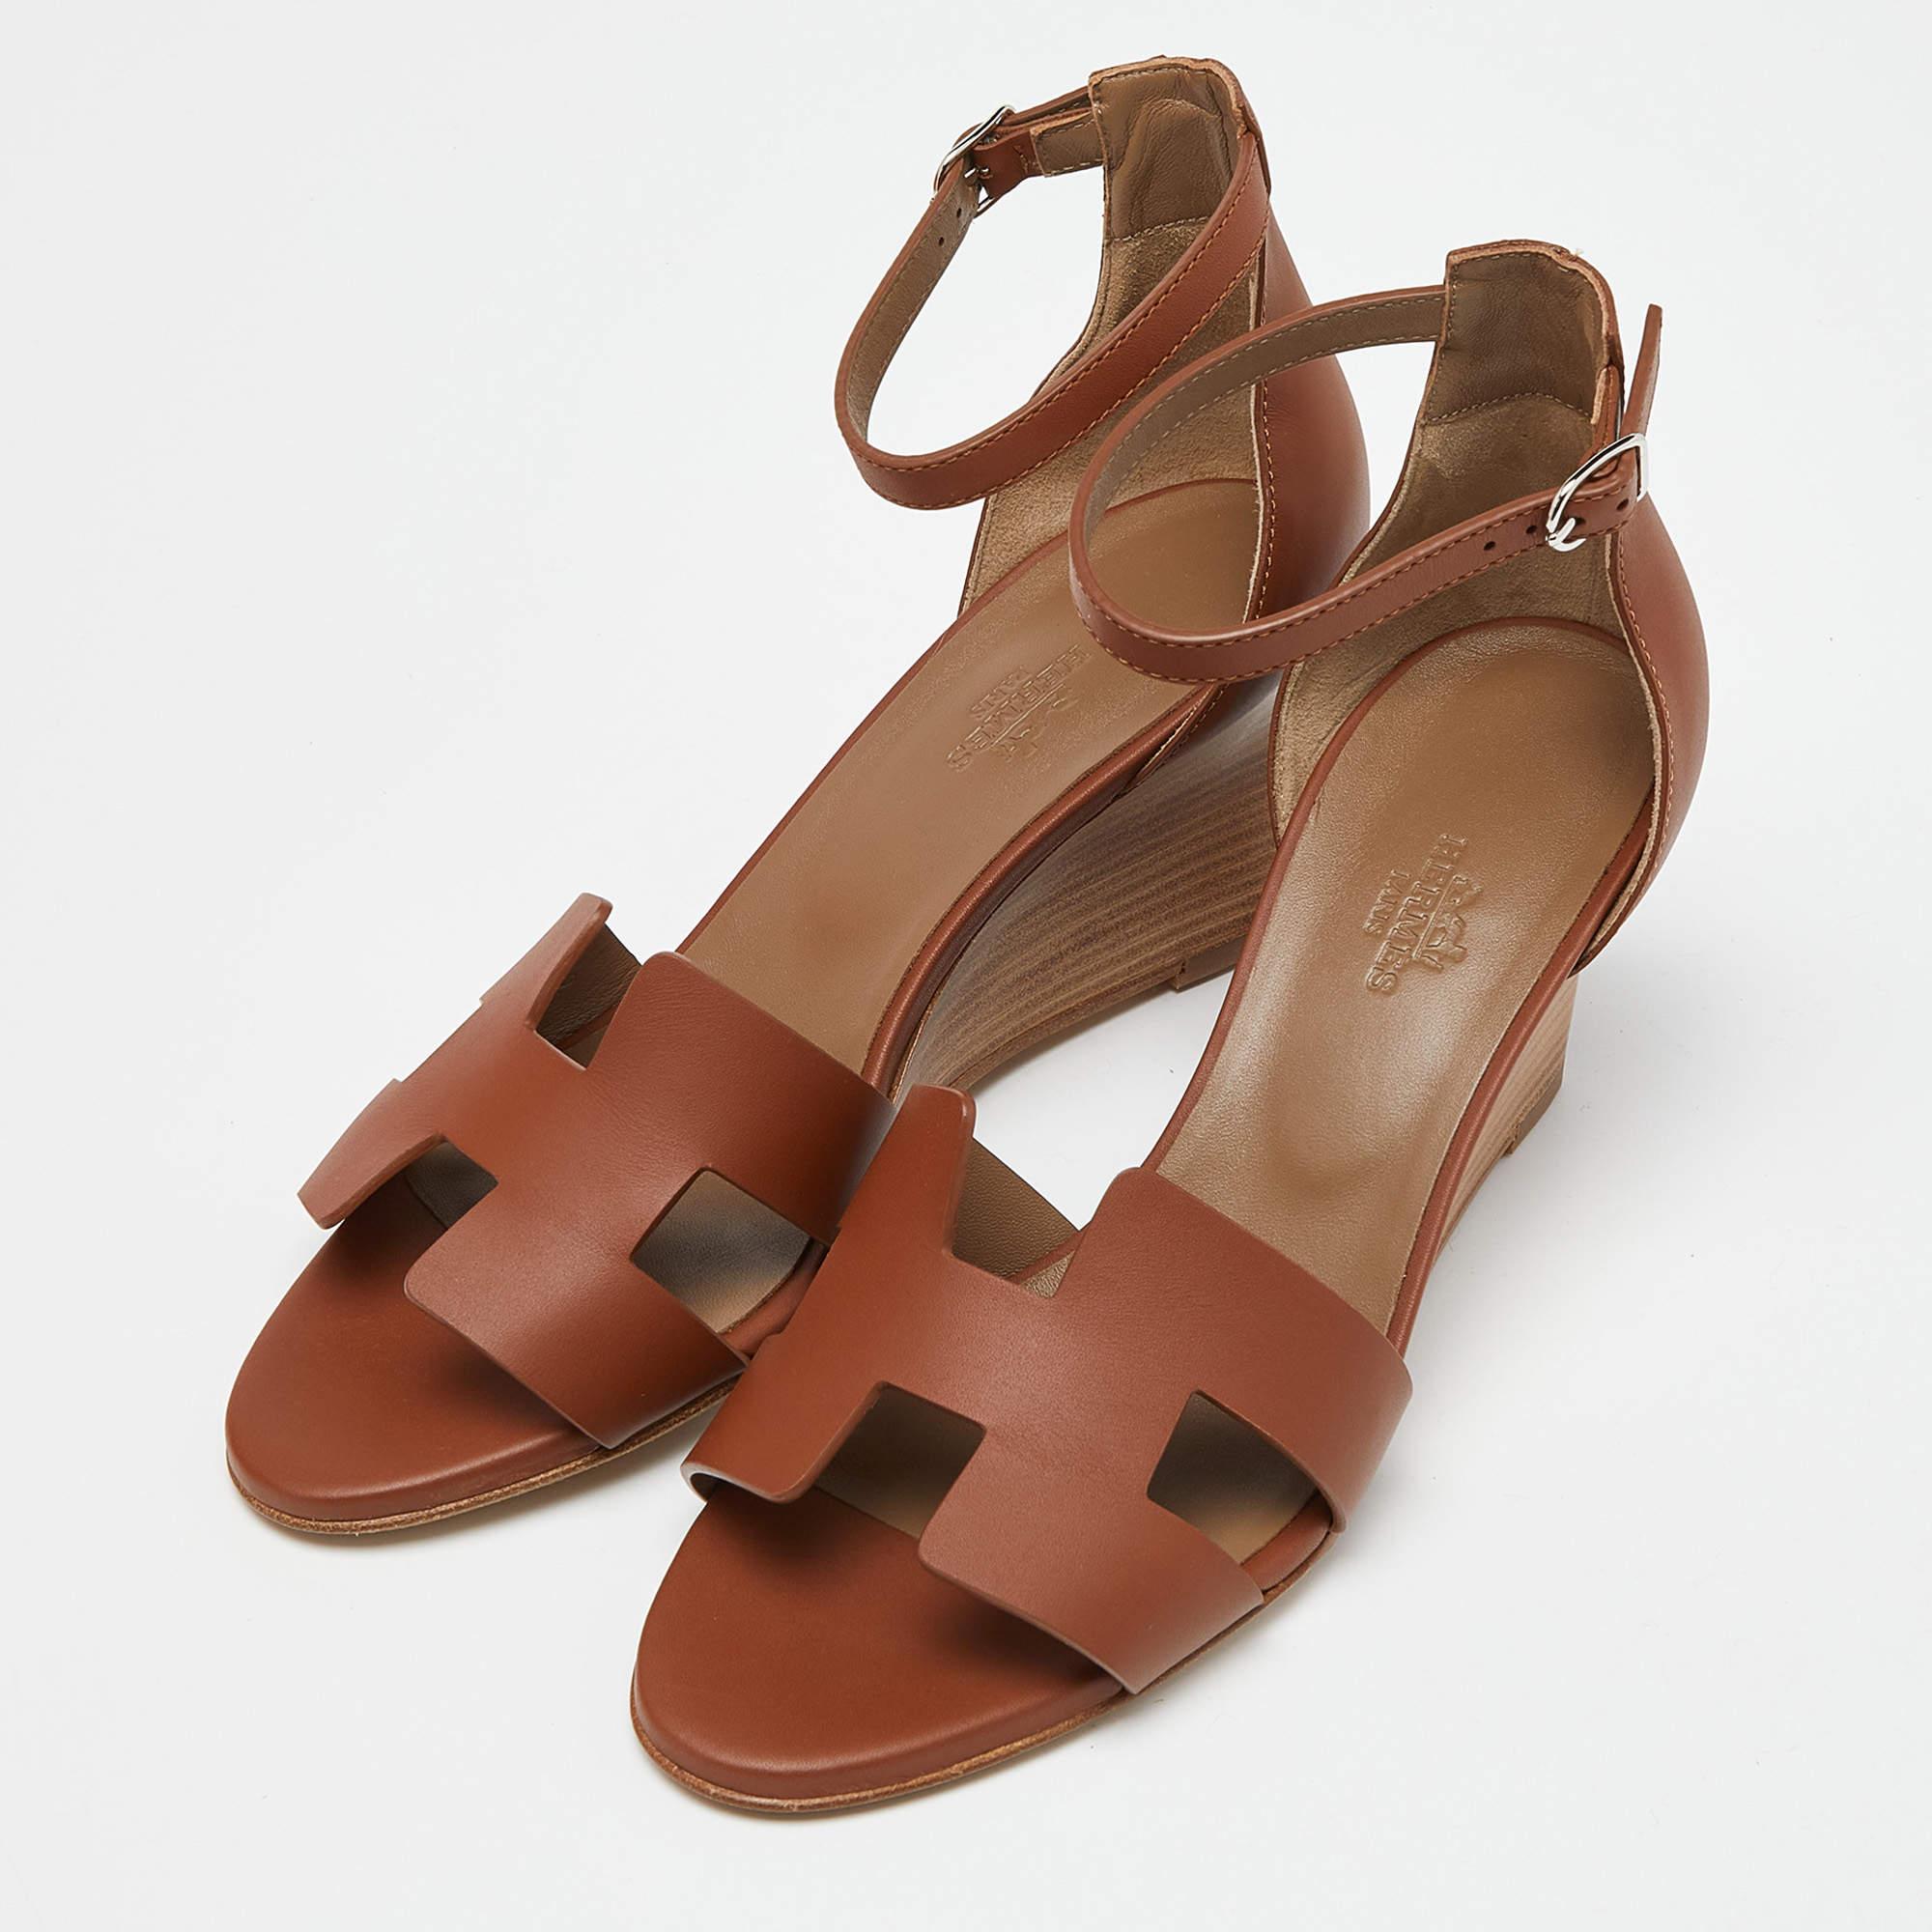 Hermes Brown Leather Legend Wedge Sandals Size 38 1